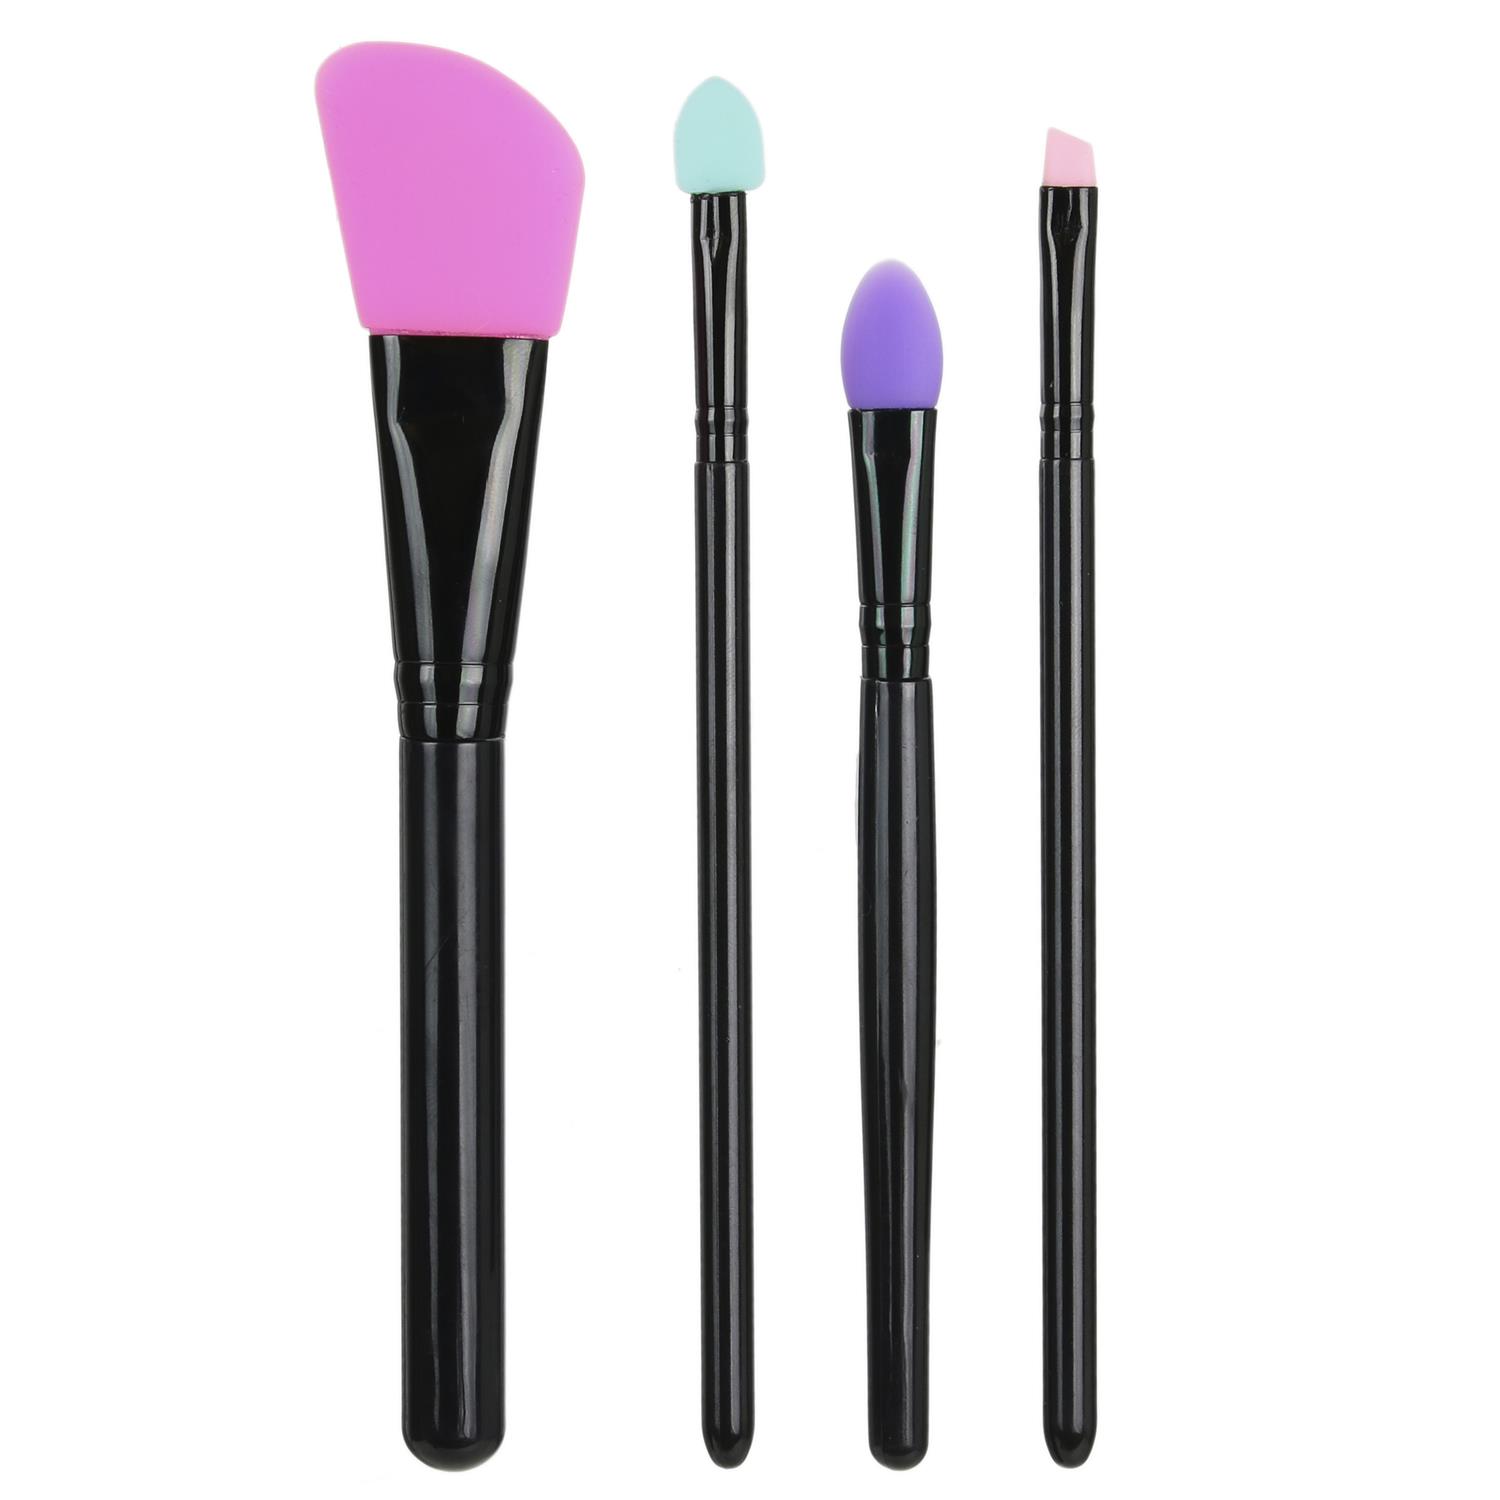 Pinceau Maquillage en Silicone x4